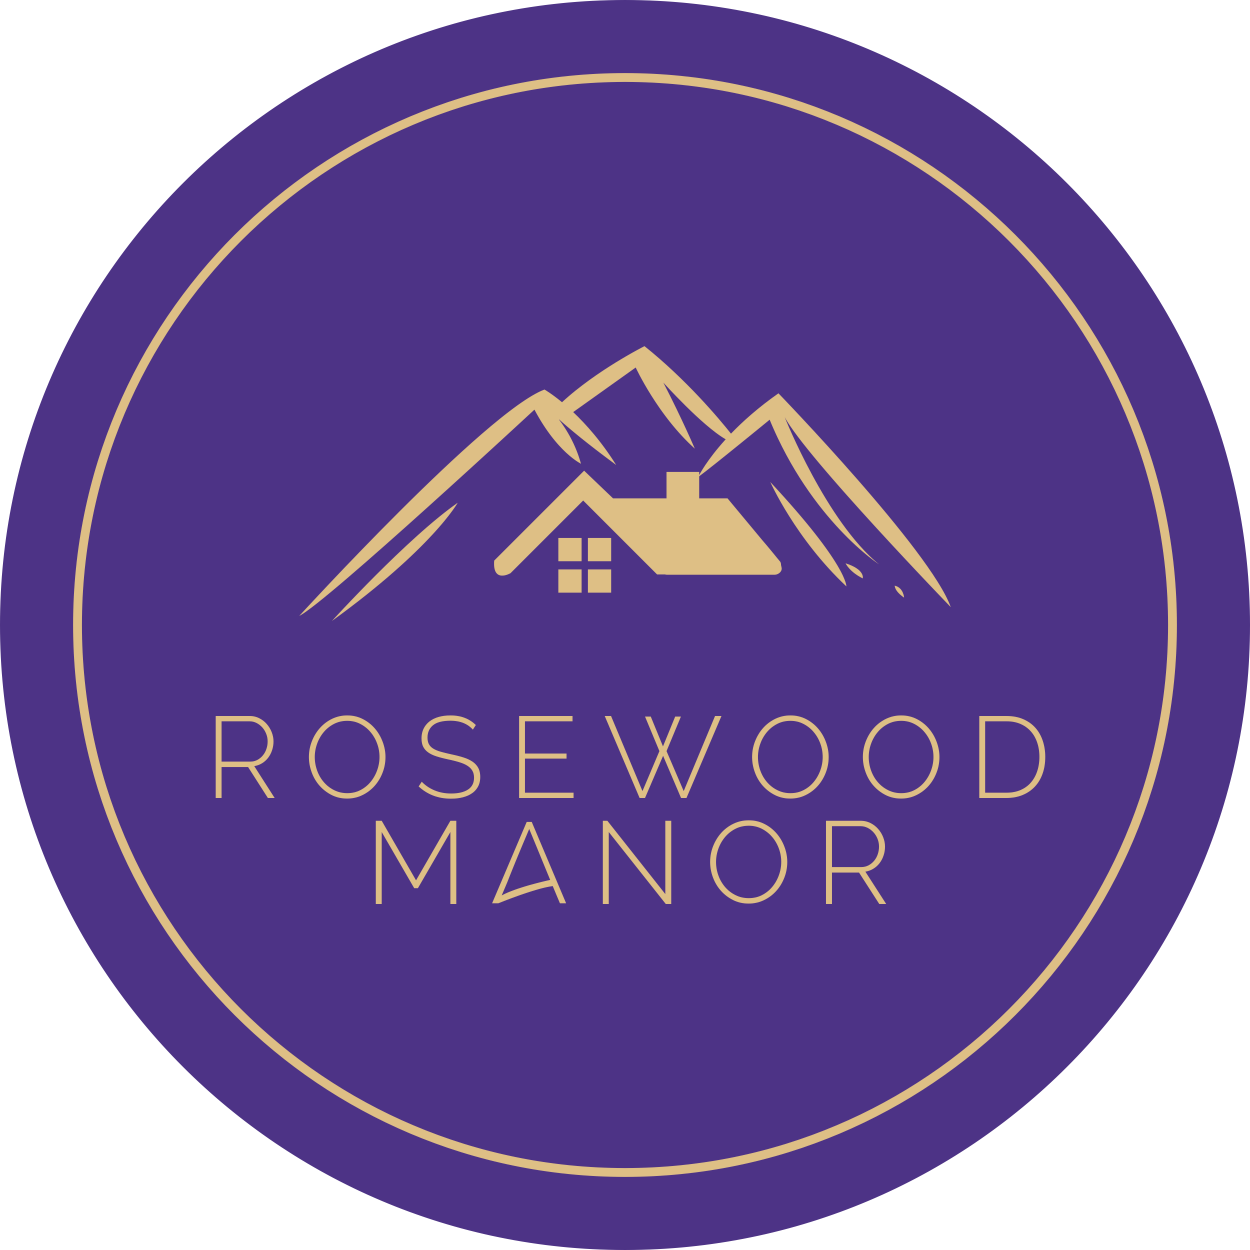 The Rosewood Manor